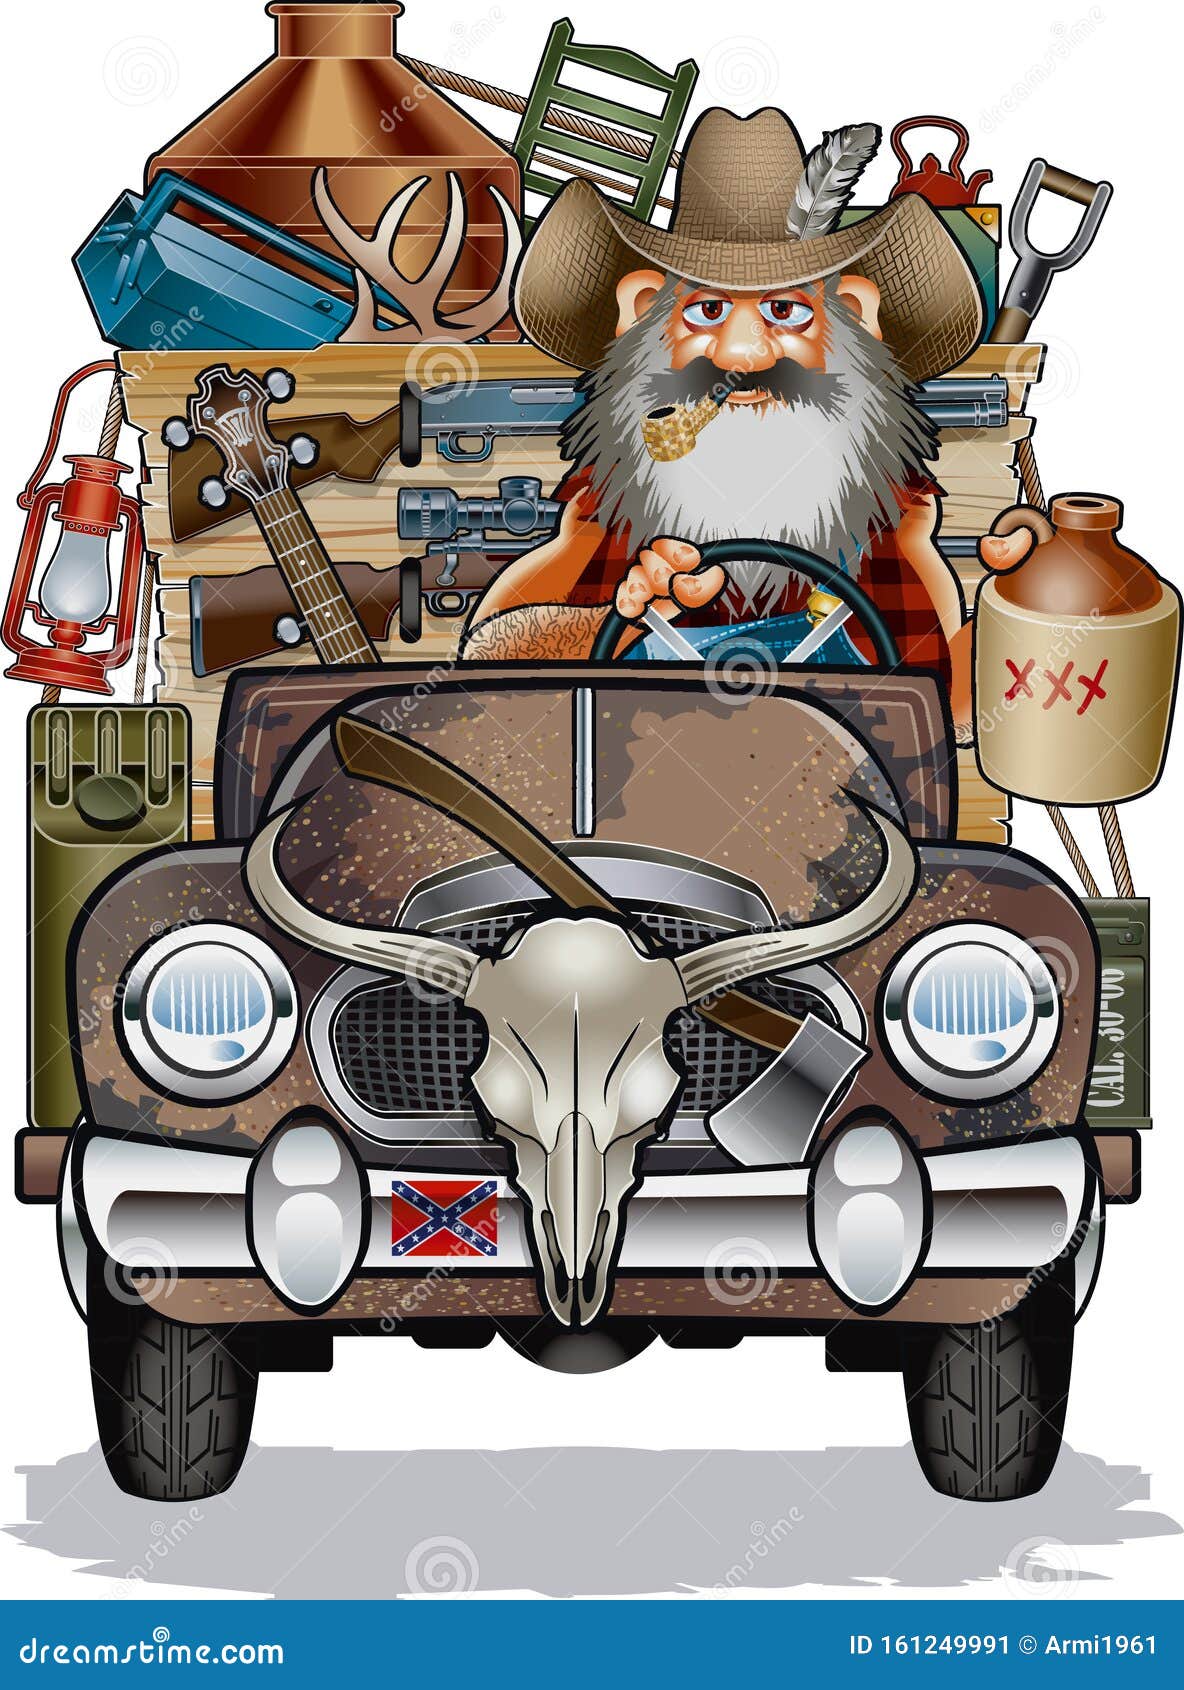 Hillbilly Cartoons, Illustrations & Vector Stock Images - 445 Pictures